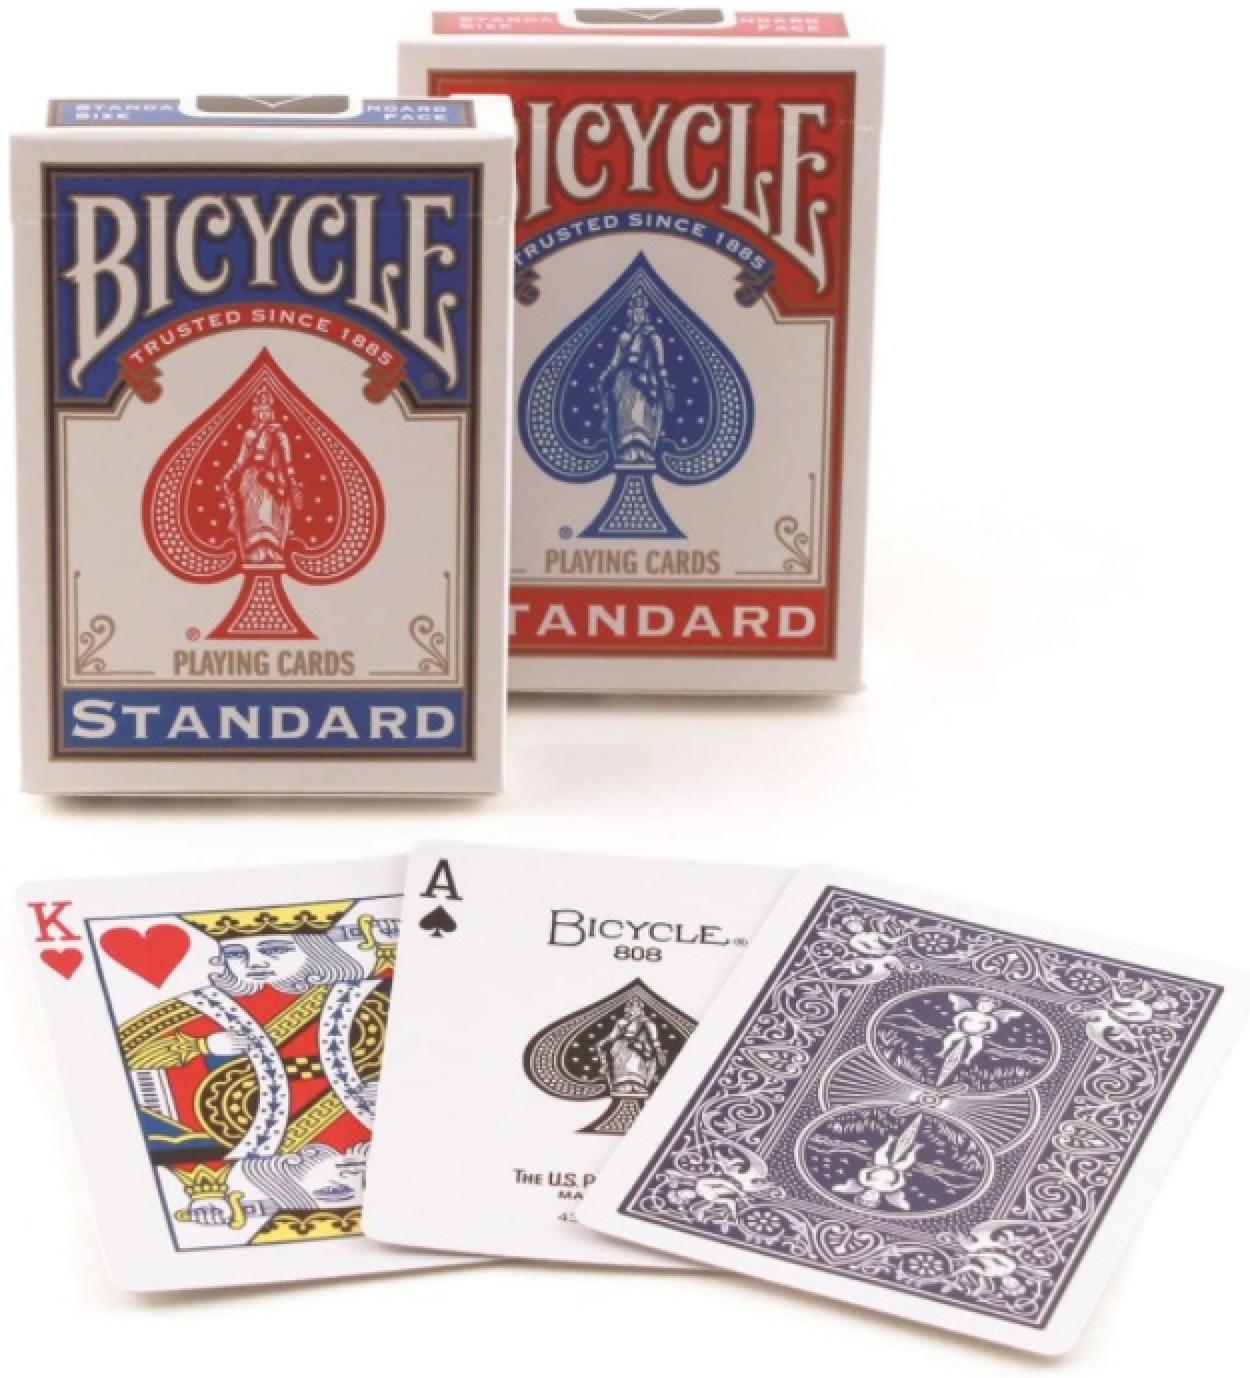 Bicycle Standard Playing Cards Showing Cards